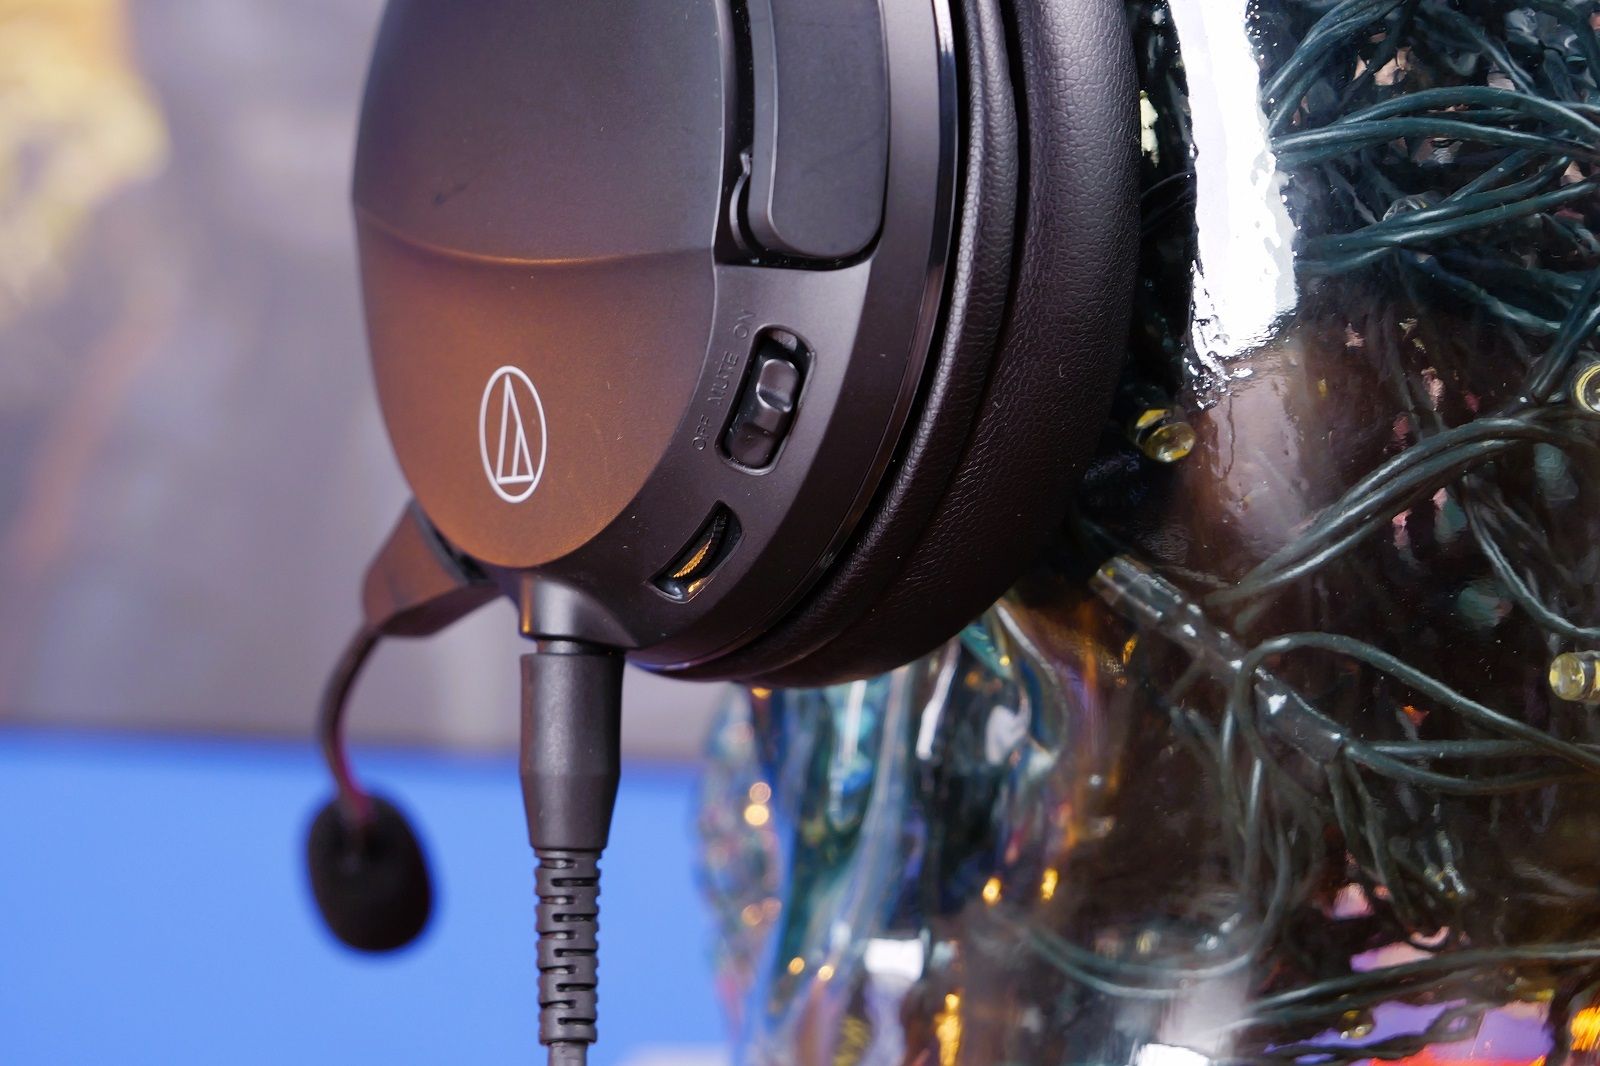 Audio-Technica ATH-GDL3 closed-back gaming headset review photo 8